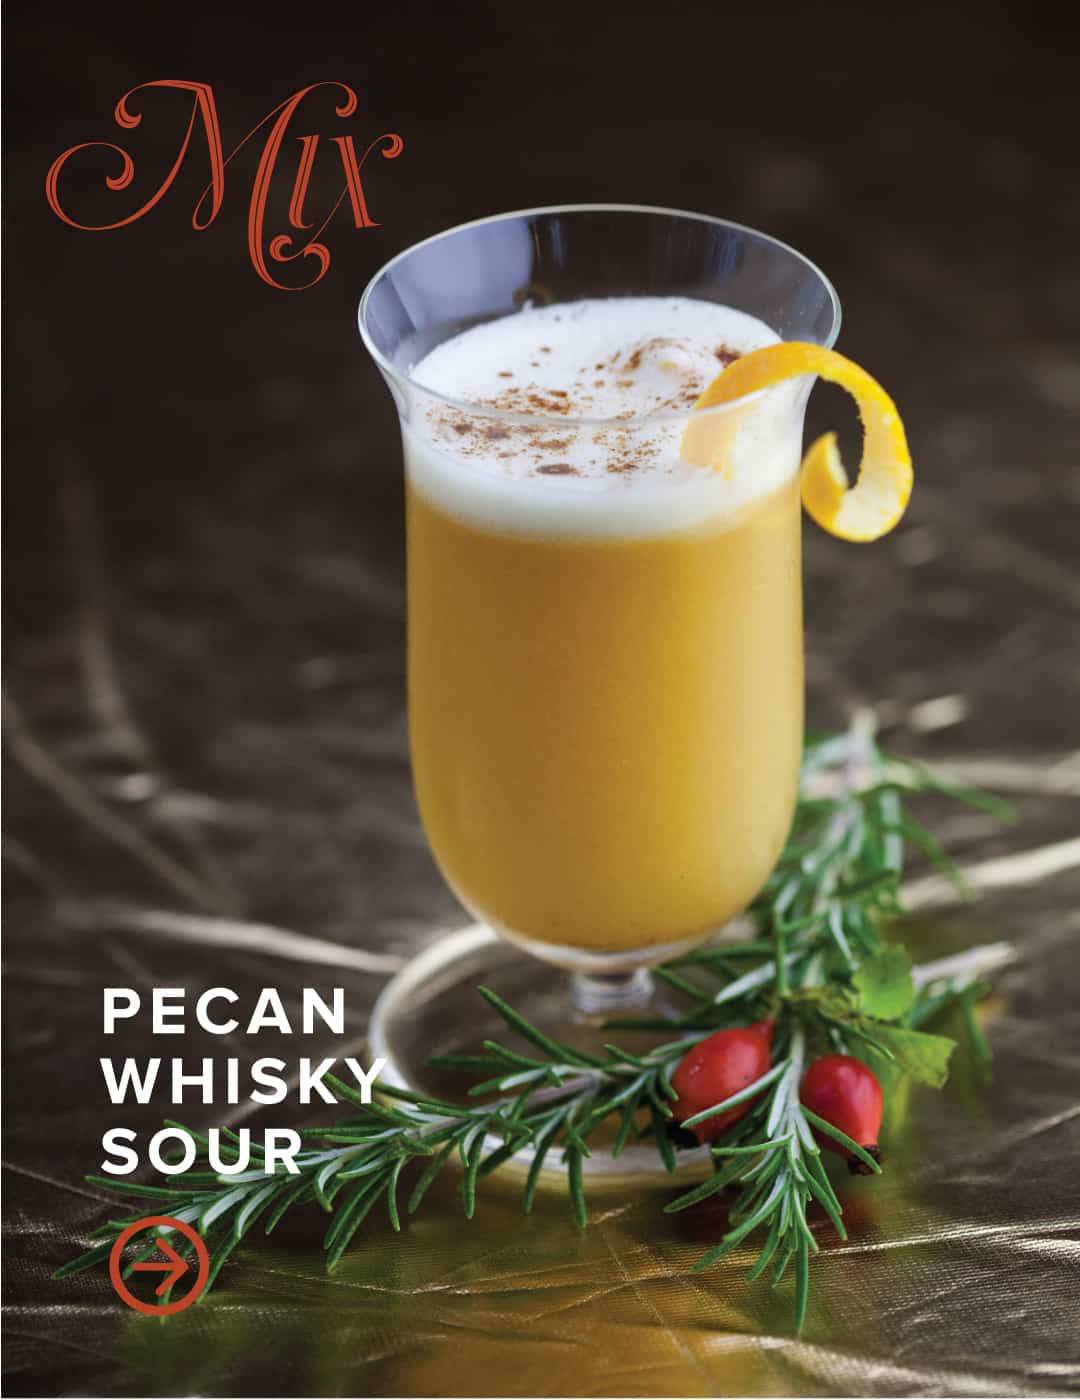 Pecan Whisky Sour